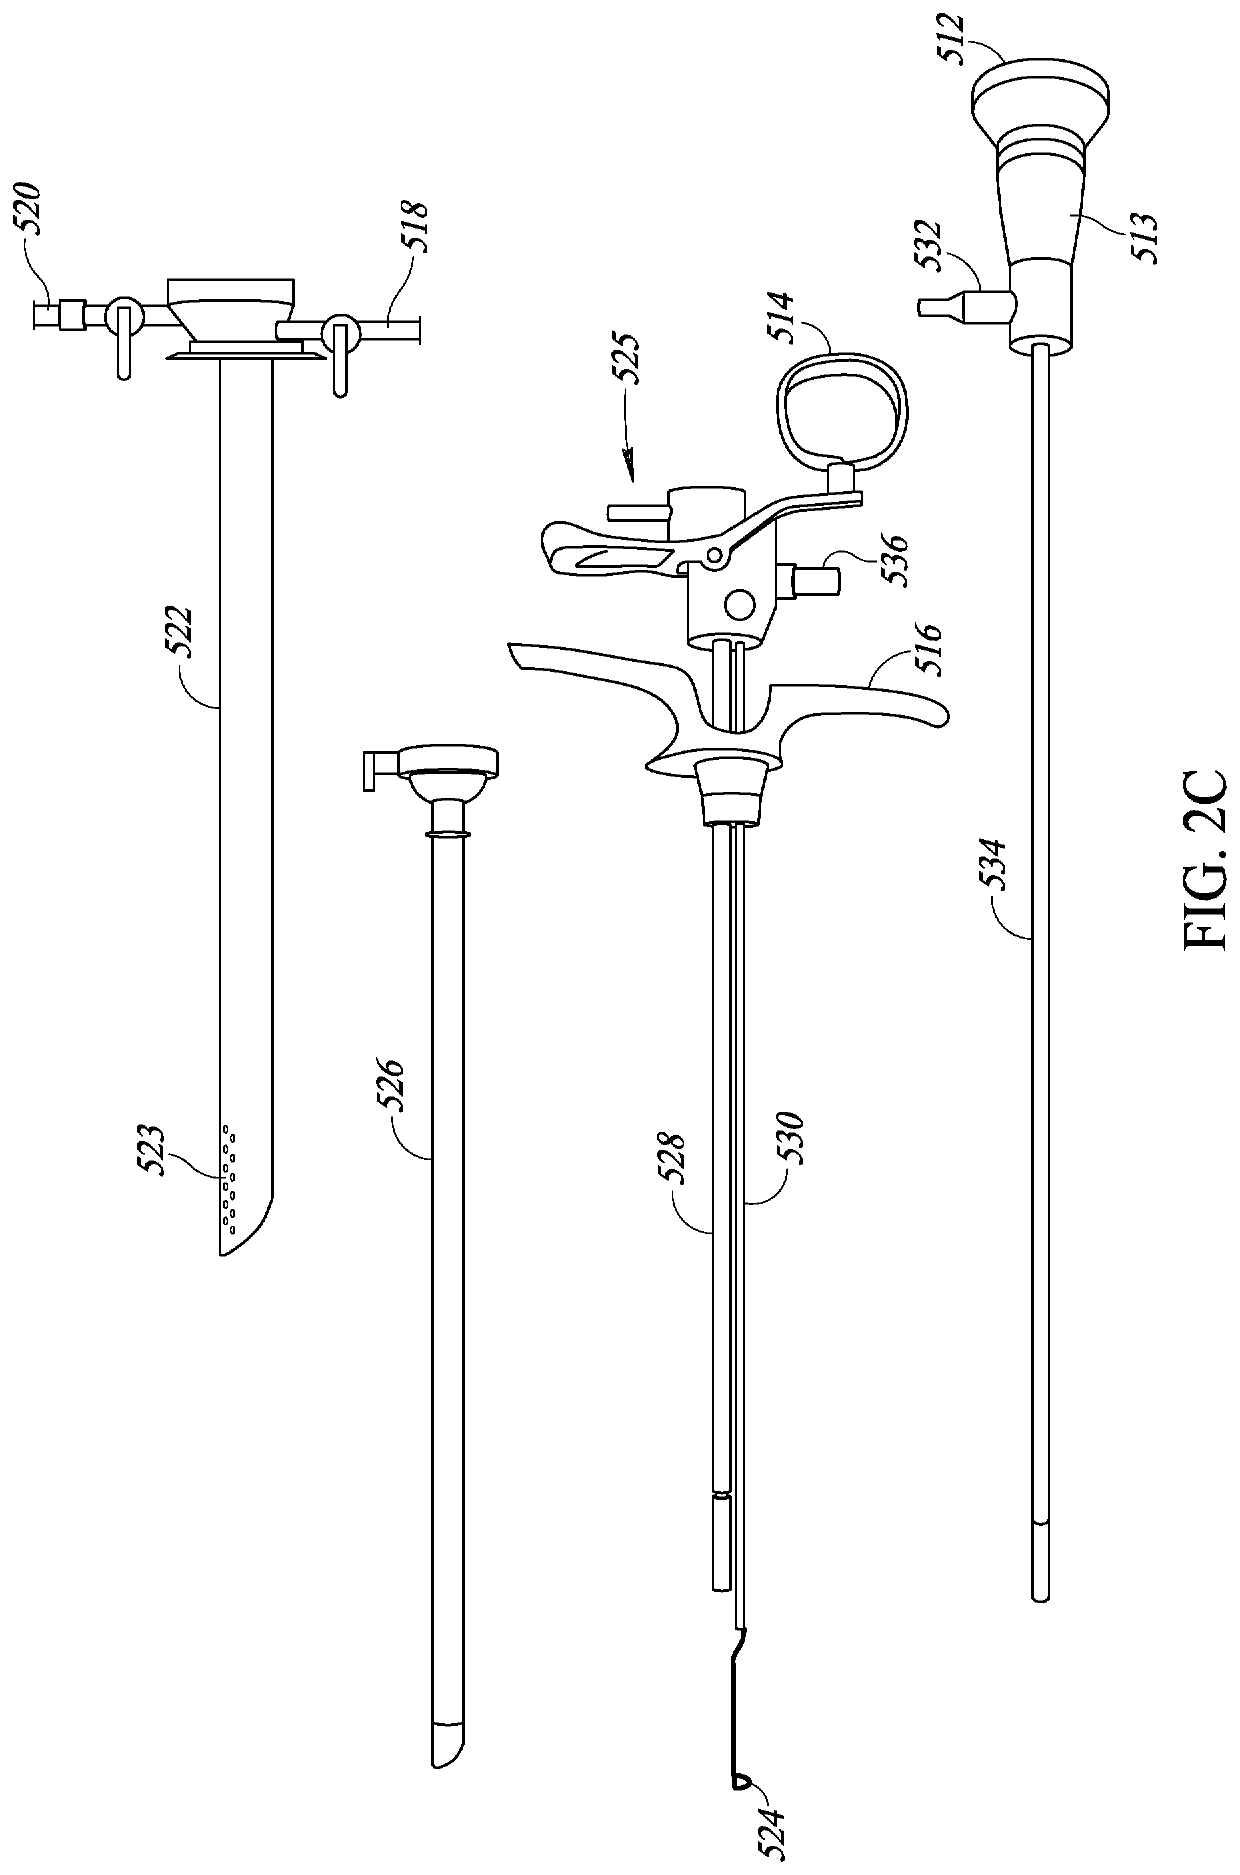 Highly maneuverable disposable resectoscope